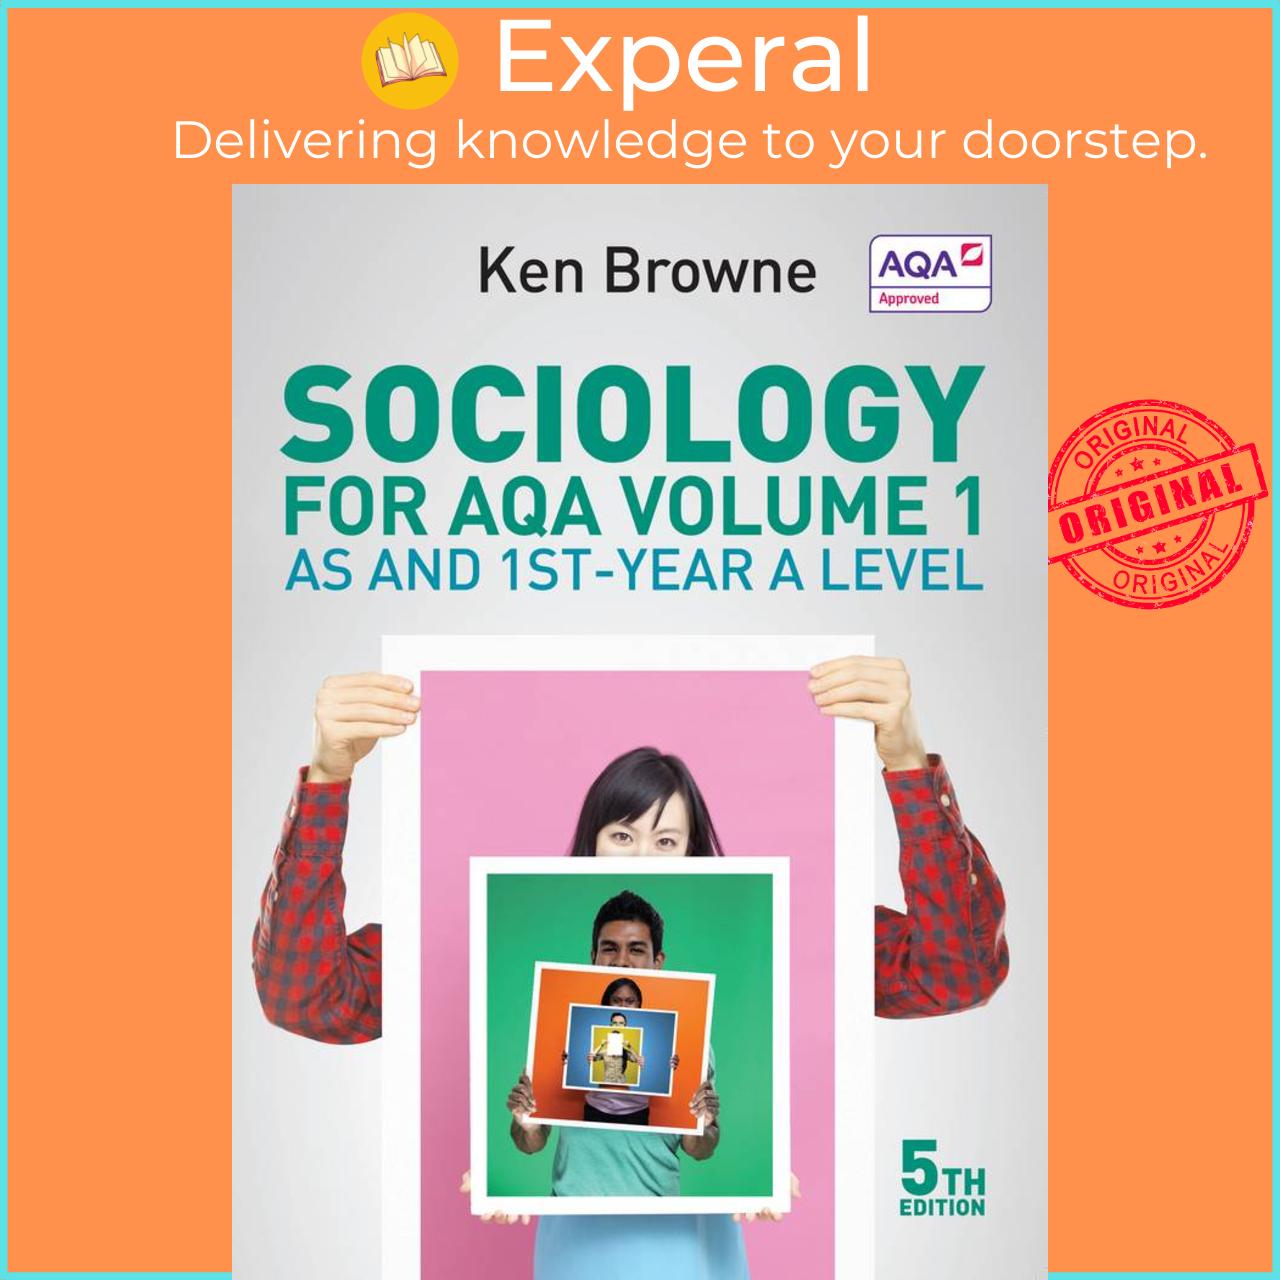 Sách - Sociology for AQA Volume 1 - AS and 1st-Year A Level by Ken Browne (US edition, paperback)